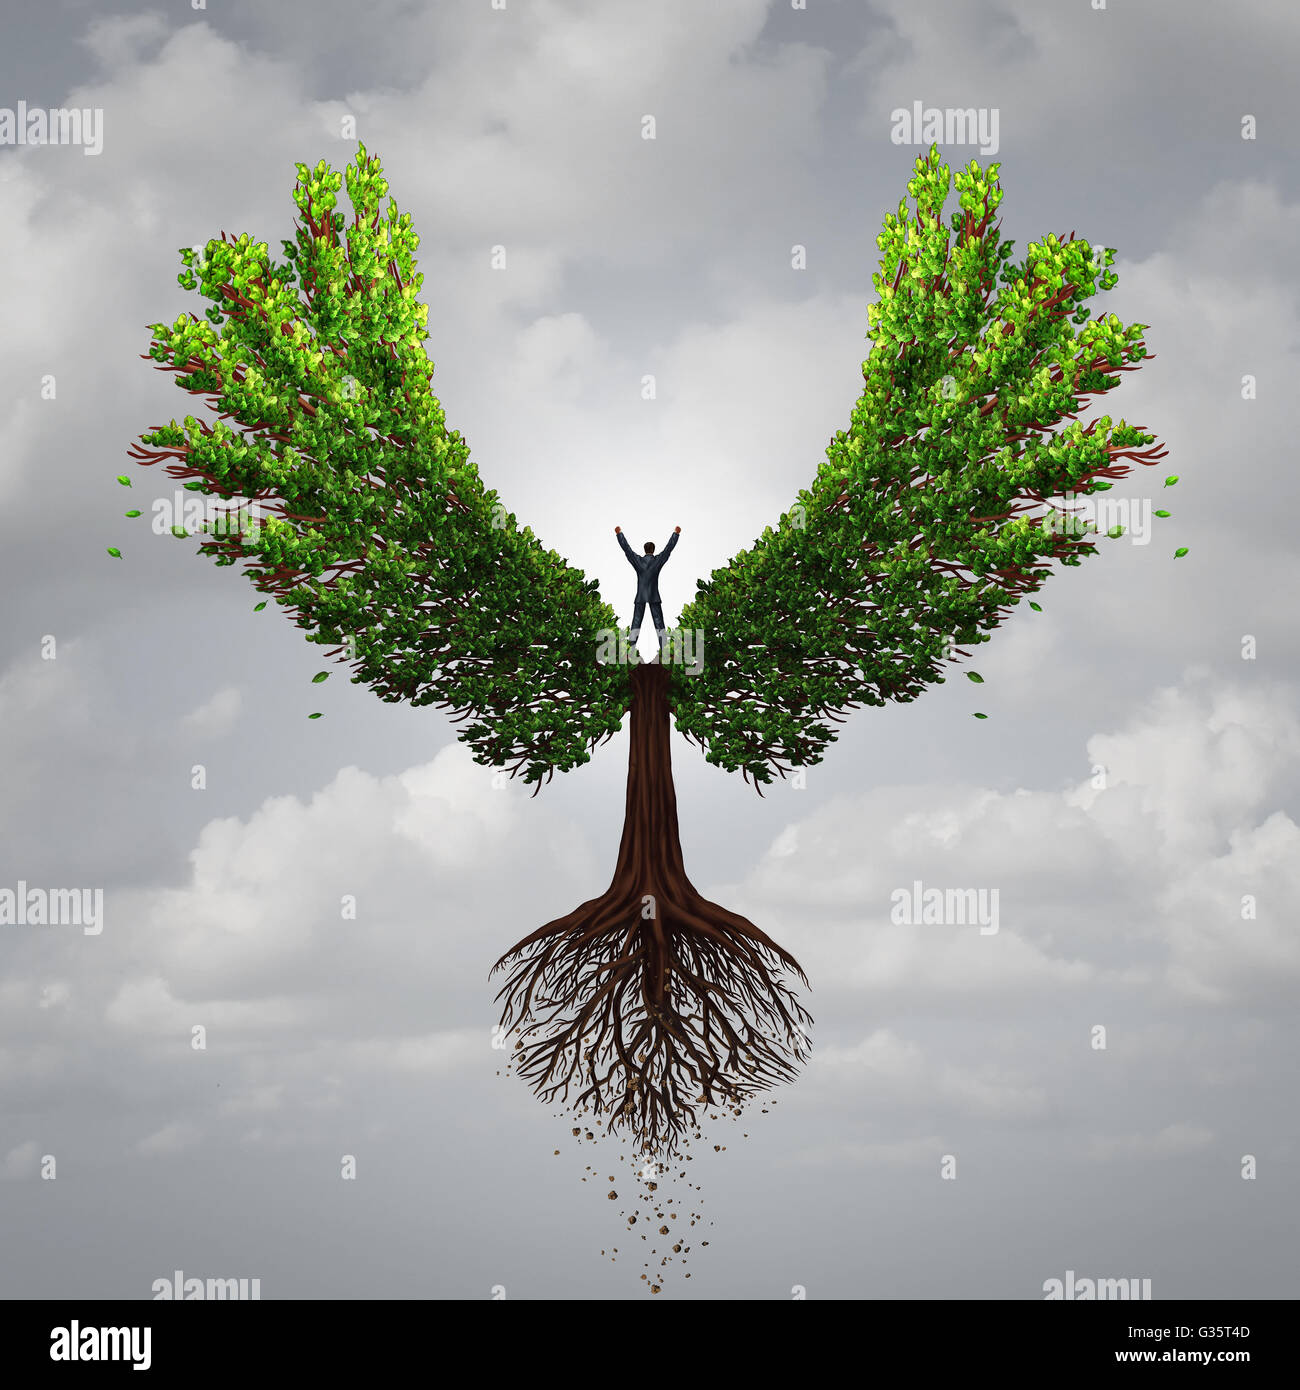 Control your life opportunity concept as a person taking charge and controlling a tree with wings flying towards a goal for success as a psychology symbol for positive thinking in a 3D illustration style. Stock Photo